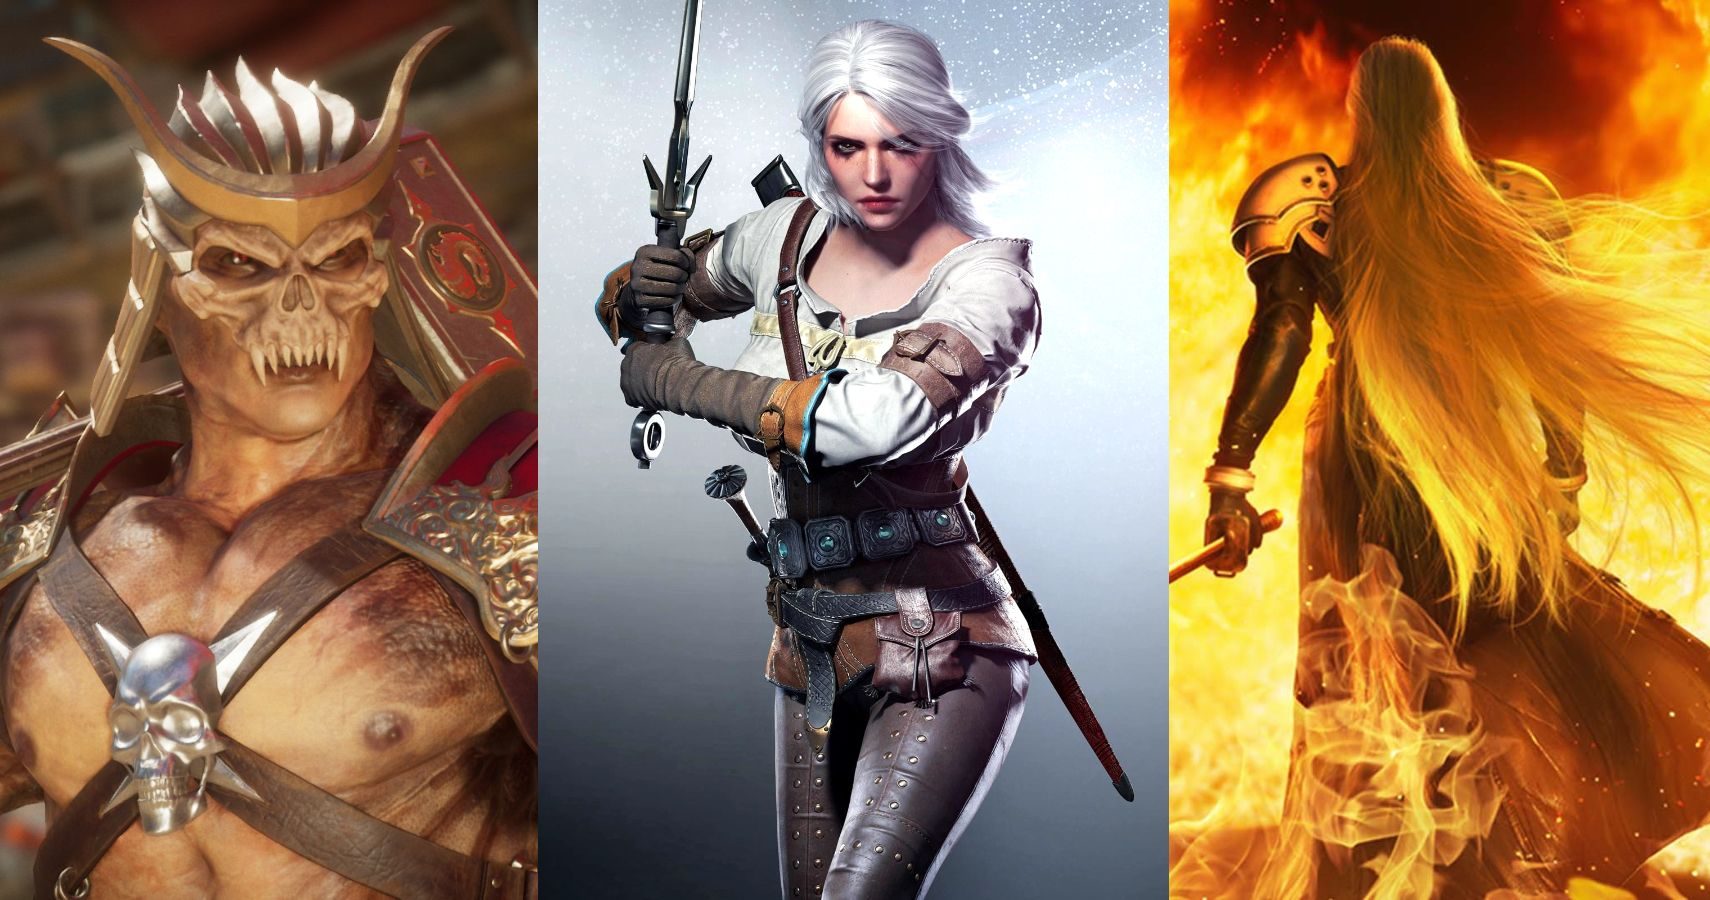 witcher-3-ciri-could-beat-sephiroth-and-other-video-game-villains-7117695